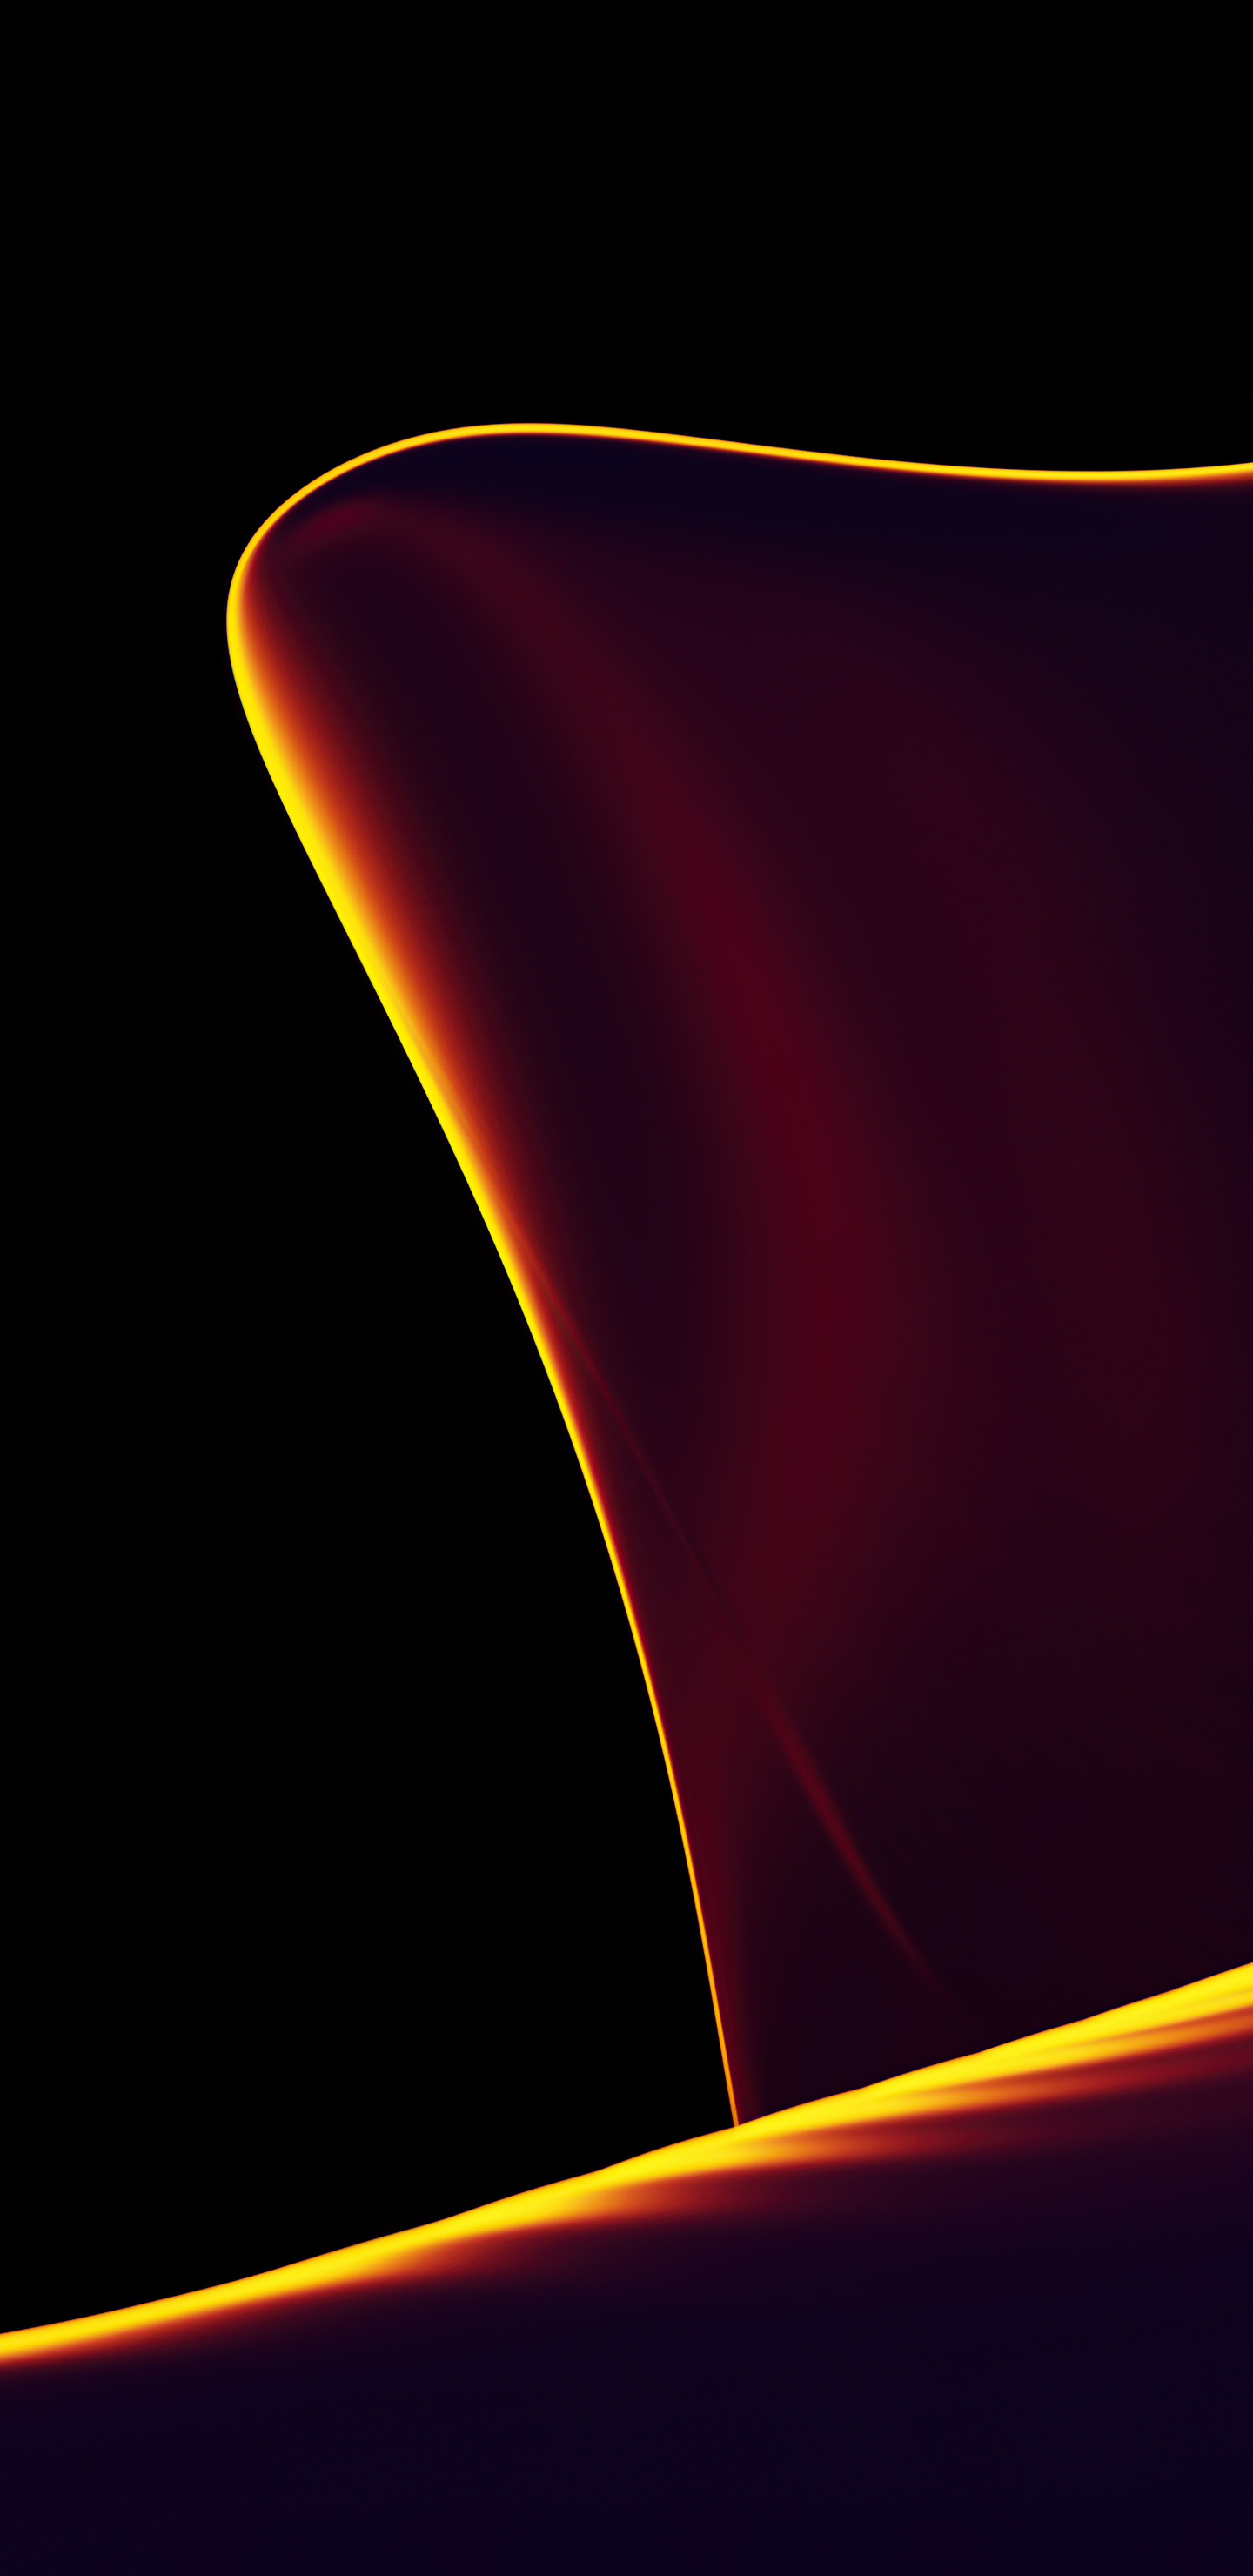 1440x2960 Amoled Shining Abstract 4k Samsung Galaxy Note 9,8, S9,S8,S8+ QHD  HD 4k Wallpapers, Images, Backgrounds, Photos and Pictures